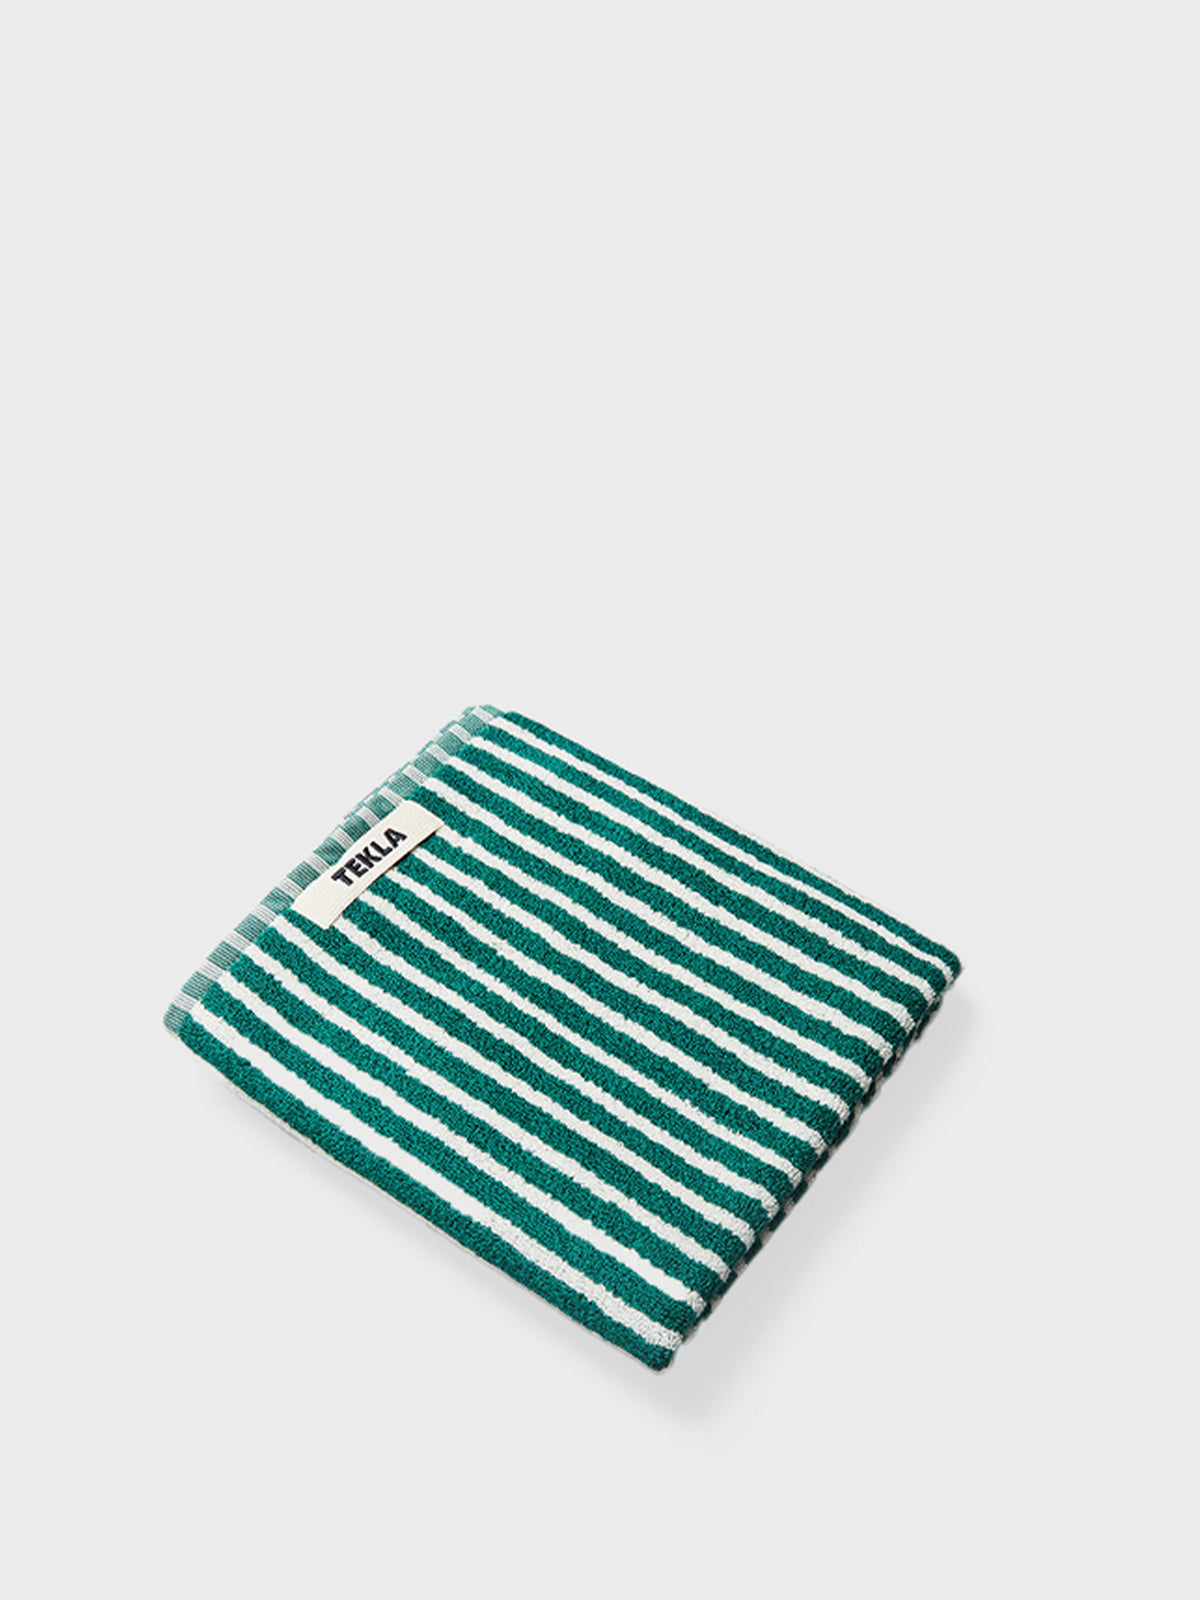 Hand Towel in Teal Green Stripes